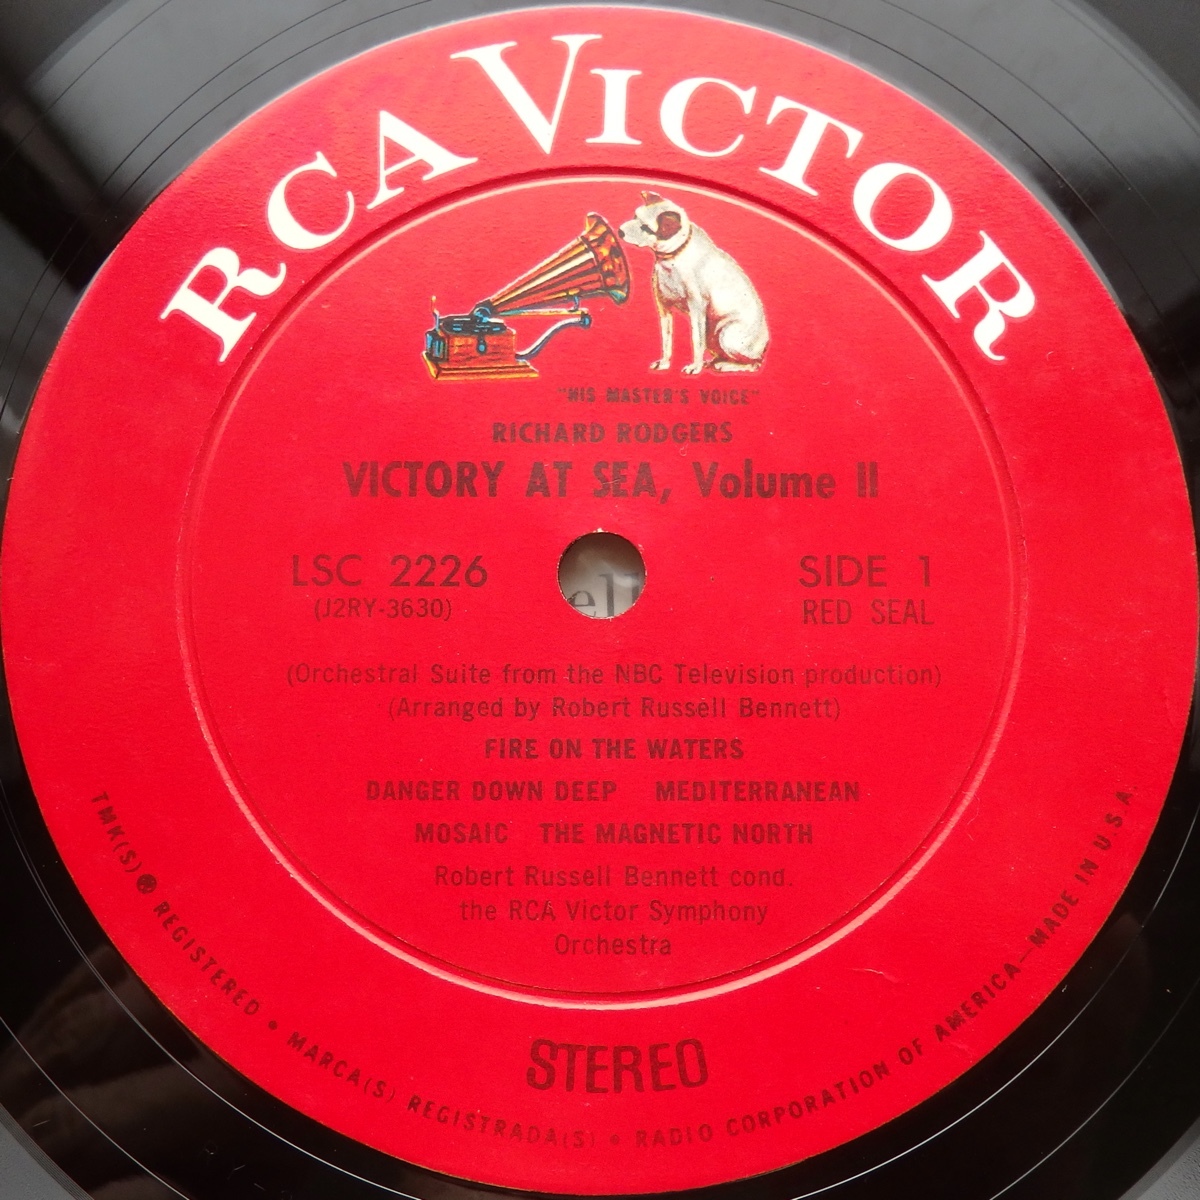 LP RICHARD RODGERS VICTORY AT THE SEA VOL.2 ROBERT RUSSELL BENNETT RCA VICTOR SYMPHONY ORCHESTRA LSC-2226 RE 米盤_画像4